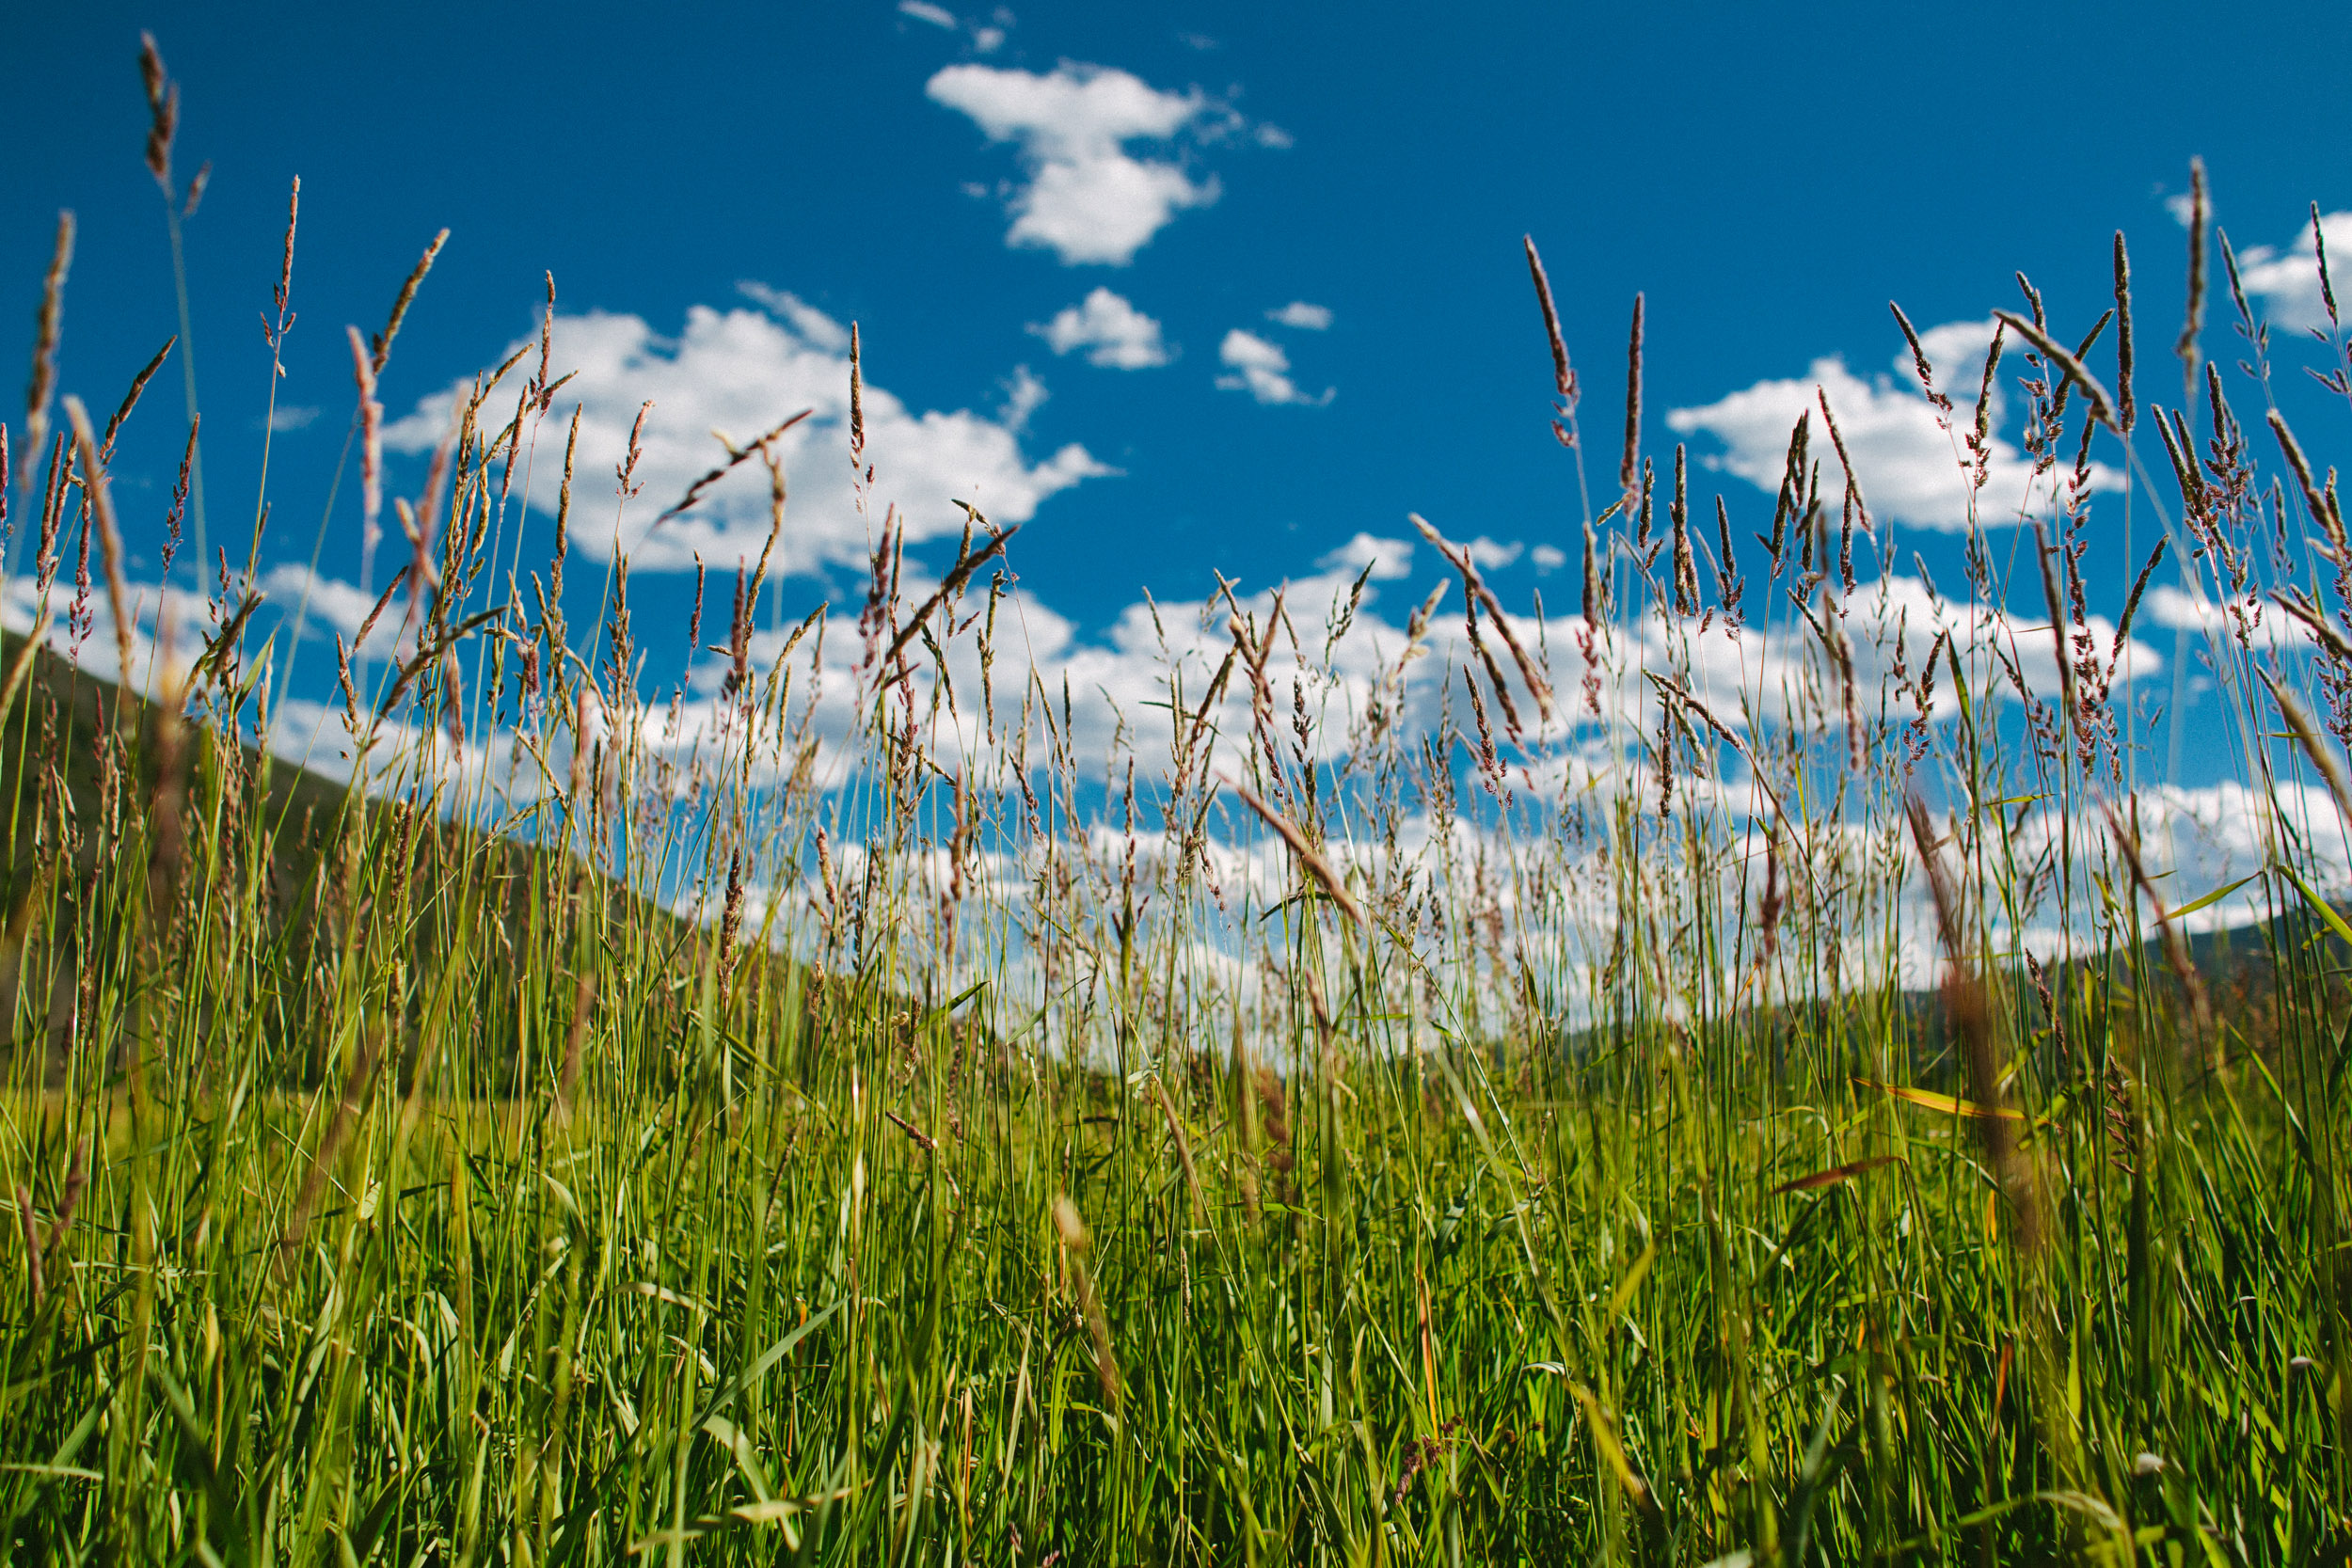 Shafts of wheat flap lazily in the afternoon breeze in Rocky Mountain National Park